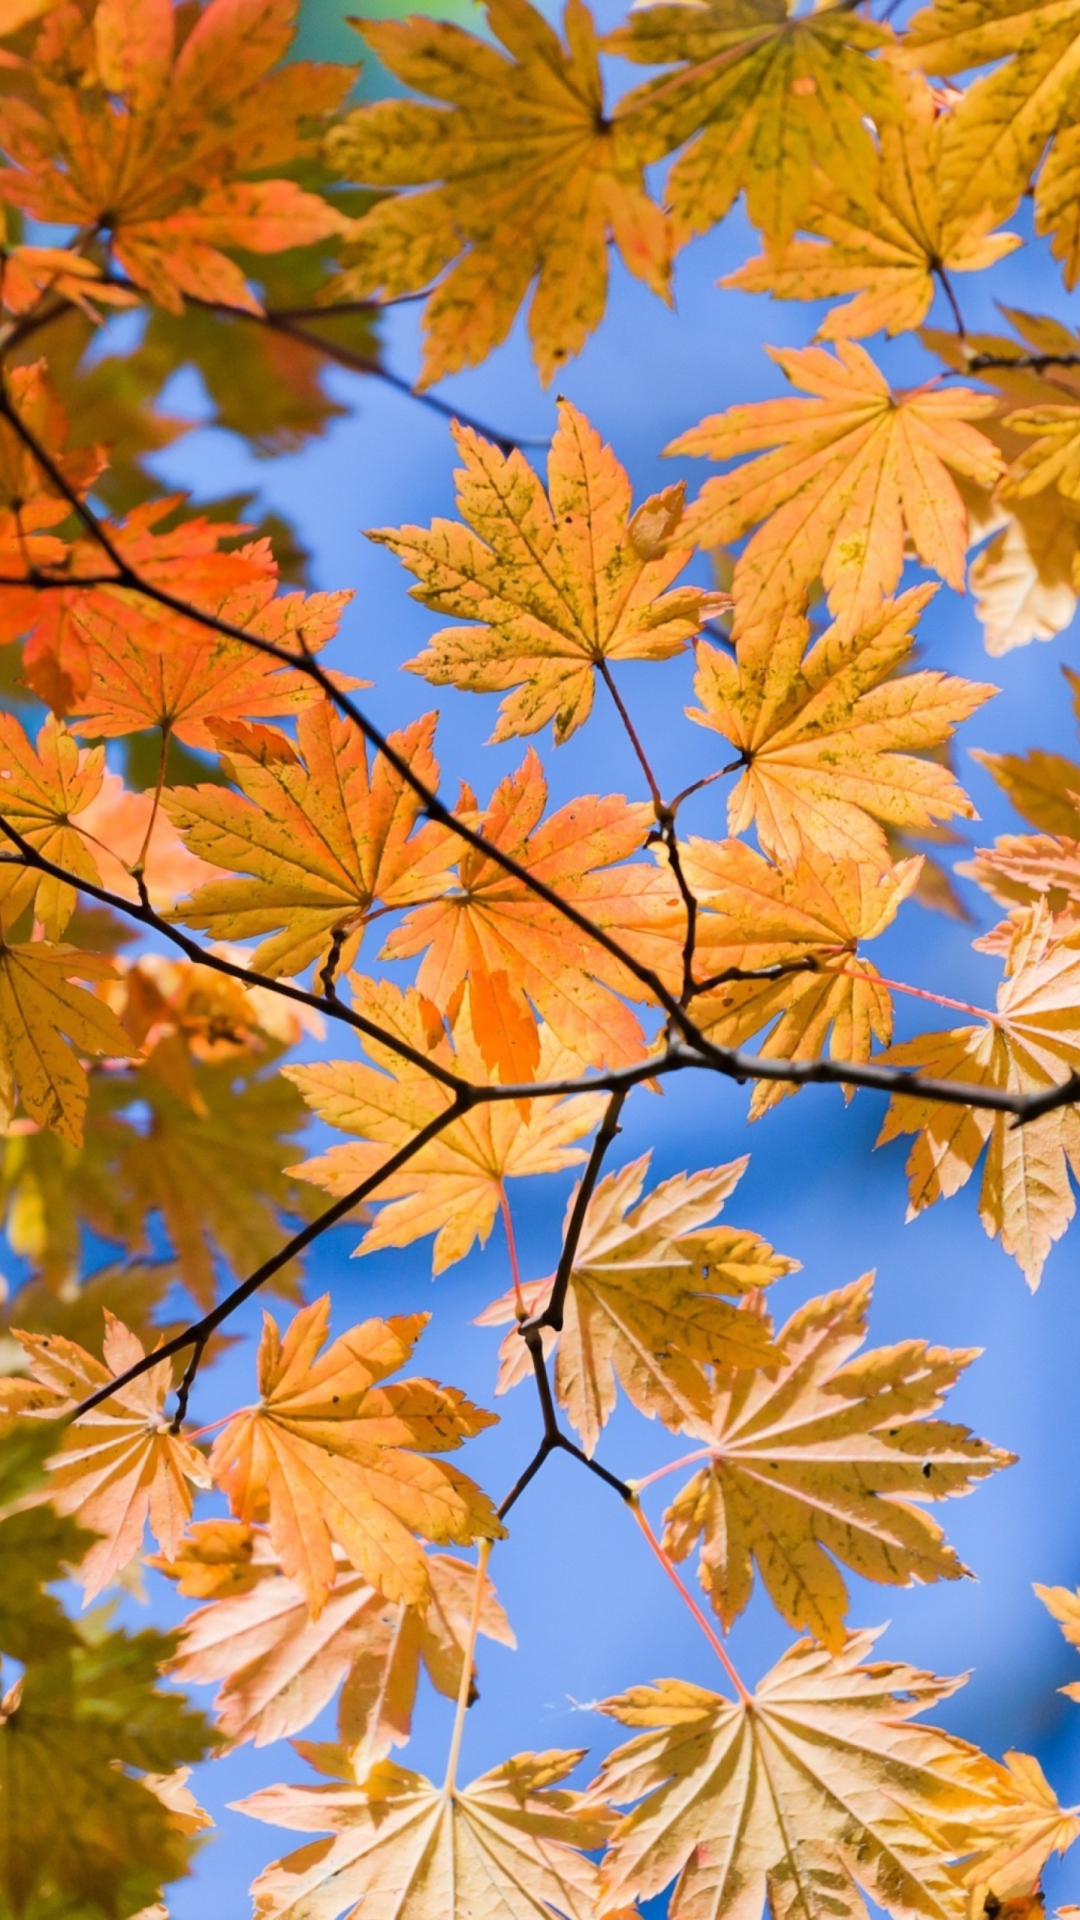 Autumn Leaves And Blue Sky wallpaper 1080x1920